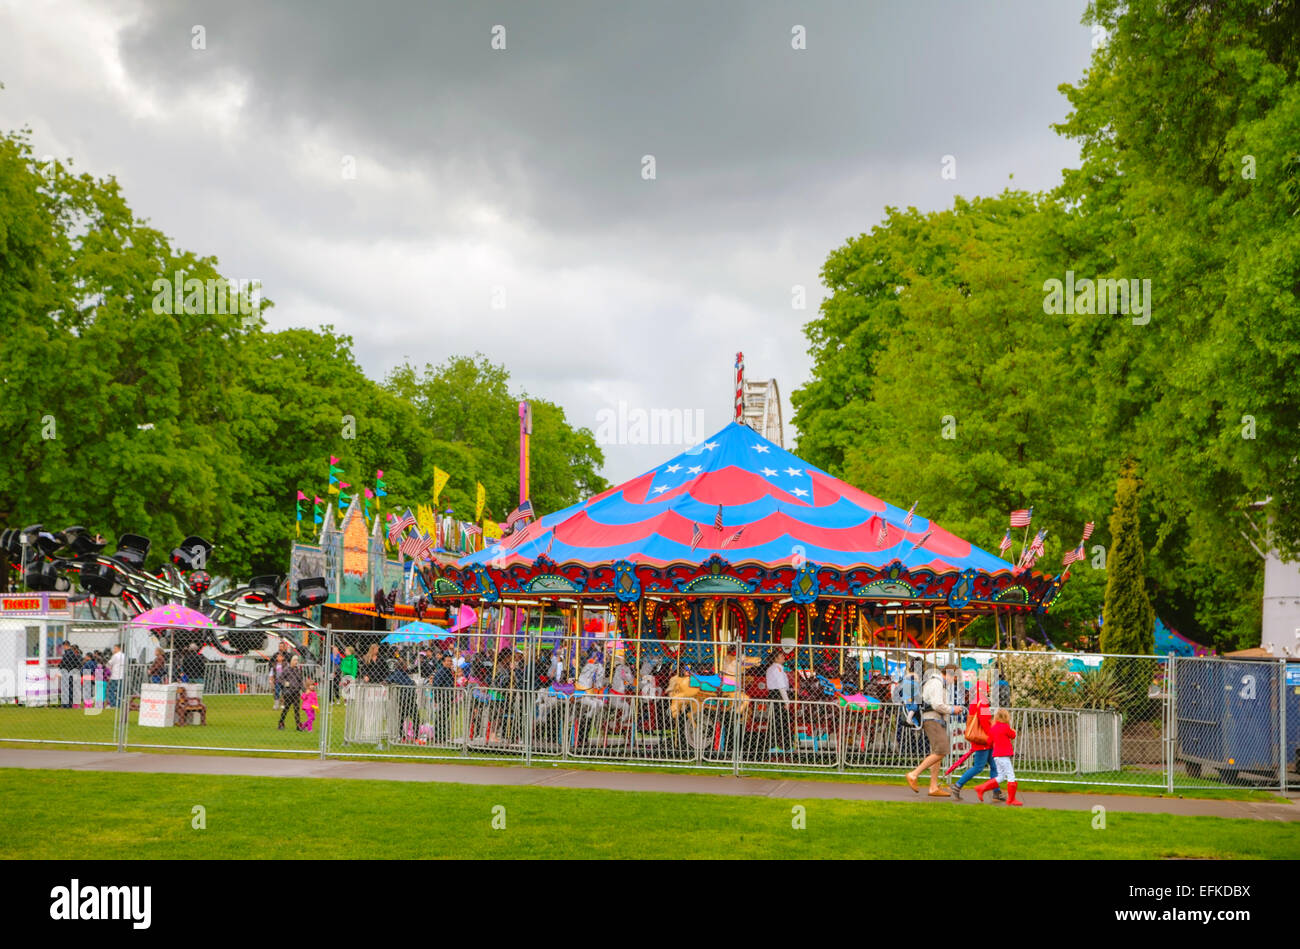 PORTLAND - MAY 04: Amusement park at Governor Tom McCall Waterfront Park on May 04, 2014 in Portland, Oregon. Stock Photo